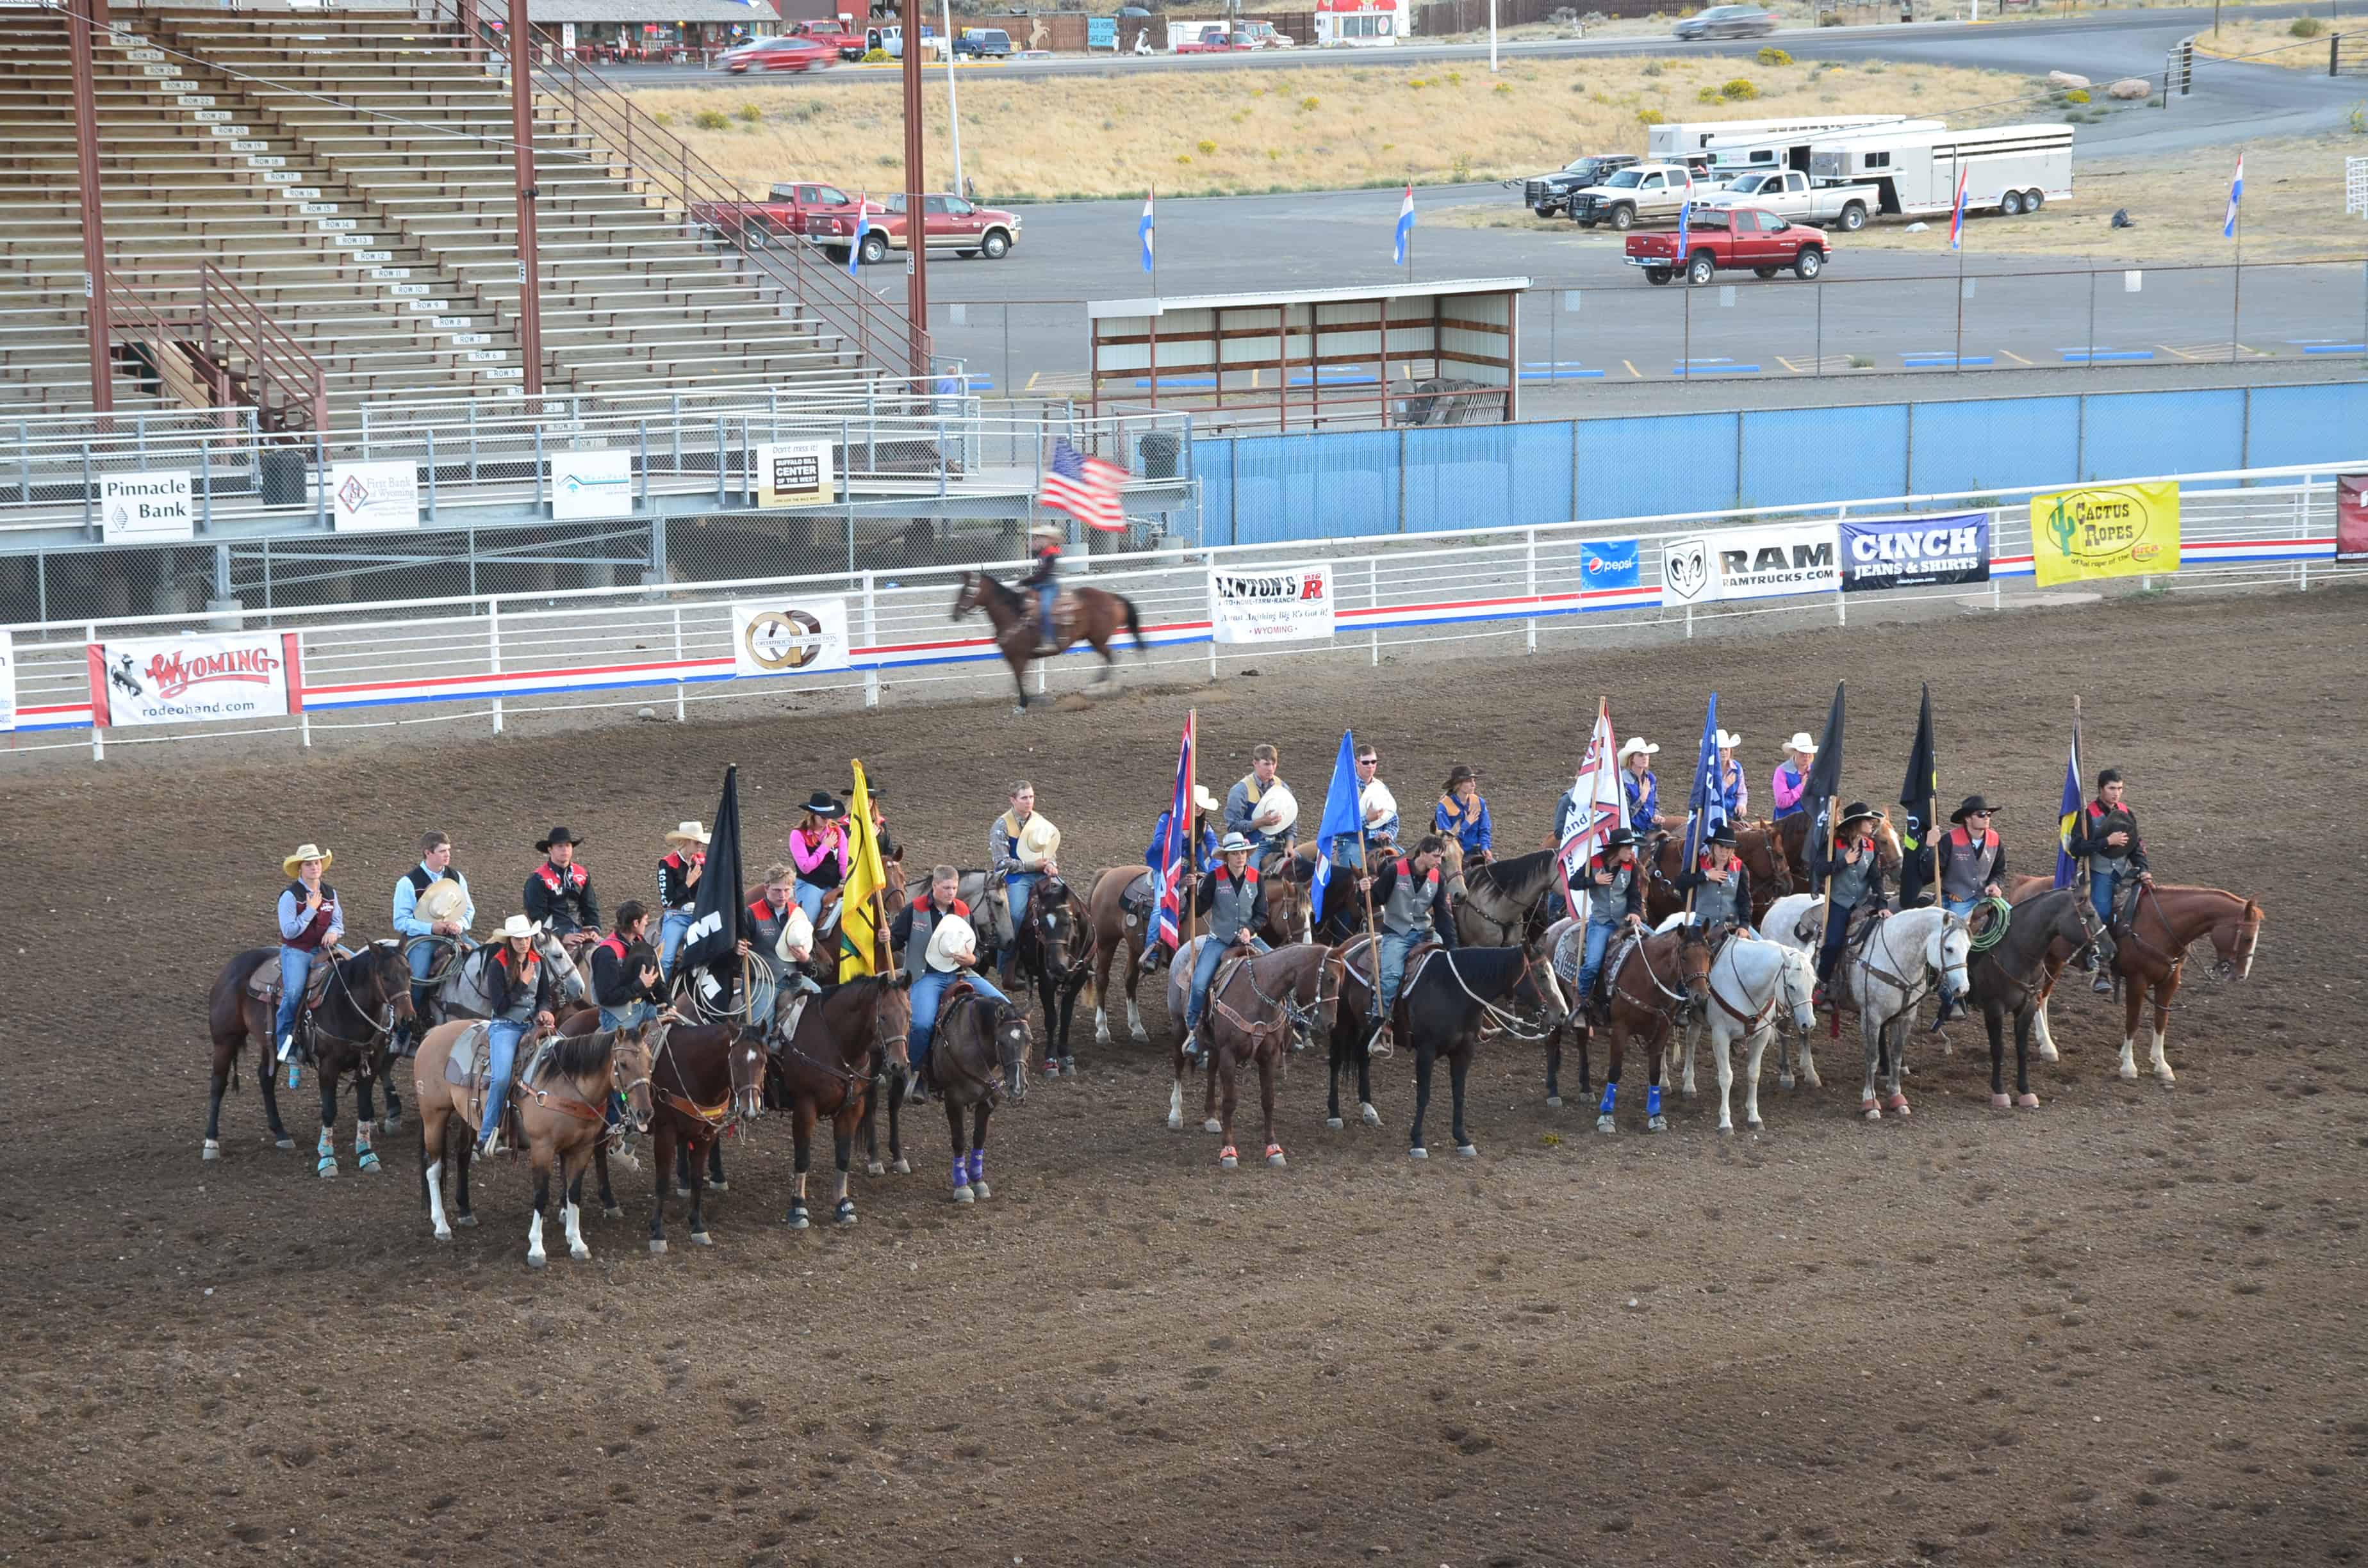 National Anthem at Stampede Park in Cody, Wyoming